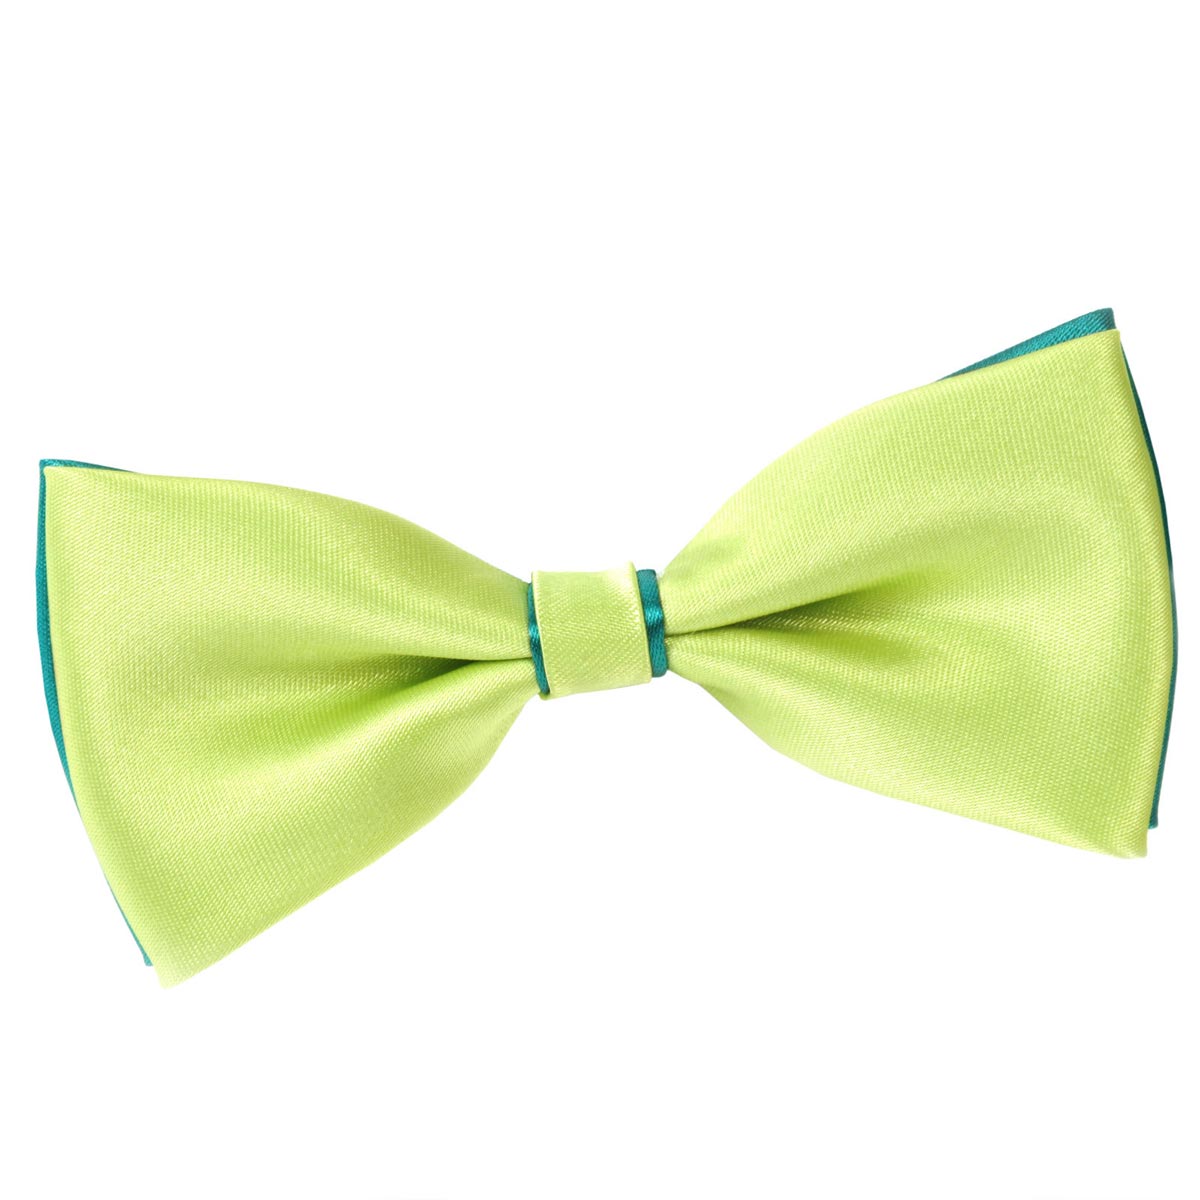 Noeud-papillon-bicolore-anis-vert-canard-dandytouch--ND-00122_A12-1--